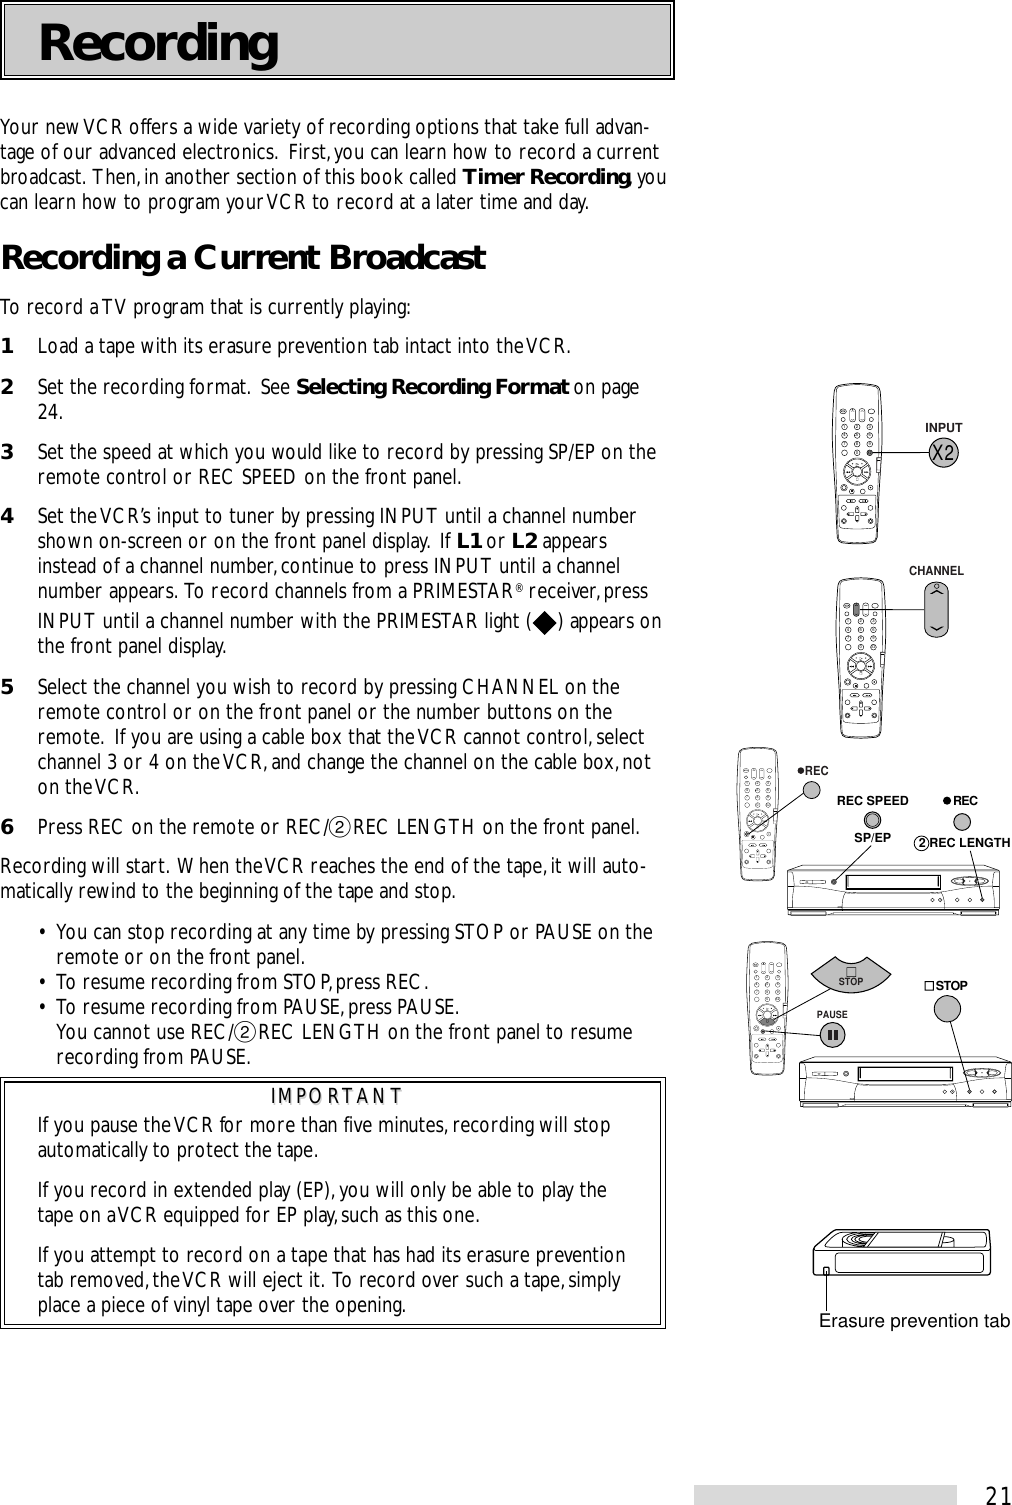 21Your new VCR offers a wide variety of recording options that take full advan-tage of our advanced electronics.  First, you can learn how to record a currentbroadcast.  Then, in another section of this book called Timer Recording, youcan learn how to program your VCR to record at a later time and day.Recording a Current BroadcastTo record a TV program that is currently playing:1Load a tape with its erasure prevention tab intact into the VCR.2Set the recording format.  See Selecting Recording Format on page24.3Set the speed at which you would like to record by pressing SP/EP on theremote control or REC SPEED on the front panel.4Set the VCR’s input to tuner by pressing INPUT until a channel numbershown on-screen or on the front panel display.  If L1 or L2 appearsinstead of a channel number, continue to press INPUT until a channelnumber appears.  To record channels from a PRIMESTAR® receiver, pressINPUT until a channel number with the PRIMESTAR light ( ) appears onthe front panel display.5Select the channel you wish to record by pressing CHANNEL on theremote control or on the front panel or the number buttons on theremote.  If you are using a cable box that the VCR cannot control, selectchannel 3 or 4 on the VCR, and change the channel on the cable box, noton the VCR.6Press REC on the remote or REC/˙REC LENGTH on the front panel.Recording will start.  When the VCR reaches the end of the tape, it will auto-matically rewind to the beginning of the tape and stop.• You can stop recording at any time by pressing STOP or PAUSE on theremote or on the front panel.• To resume recording from STOP, press REC.• To resume recording from PAUSE, press PAUSE.You cannot use REC/˙REC LENGTH on the front panel to resumerecording from PAUSE.IMPORTANTIMPORTANTIf you pause the VCR for more than five minutes, recording will stopautomatically to protect the tape.If you record in extended play (EP), you will only be able to play thetape on a VCR equipped for EP play, such as this one.If you attempt to record on a tape that has had its erasure preventiontab removed, the VCR will eject it.  To record over such a tape, simplyplace a piece of vinyl tape over the opening.Recording2135468790X 2SP/EPREC SPEED   REC2 REC LENGTH   REC2135468790X 2X 2INPUT2135468790X 2CHANNEL2135468790X 2    STOPPAUSESTOPErasure prevention tab